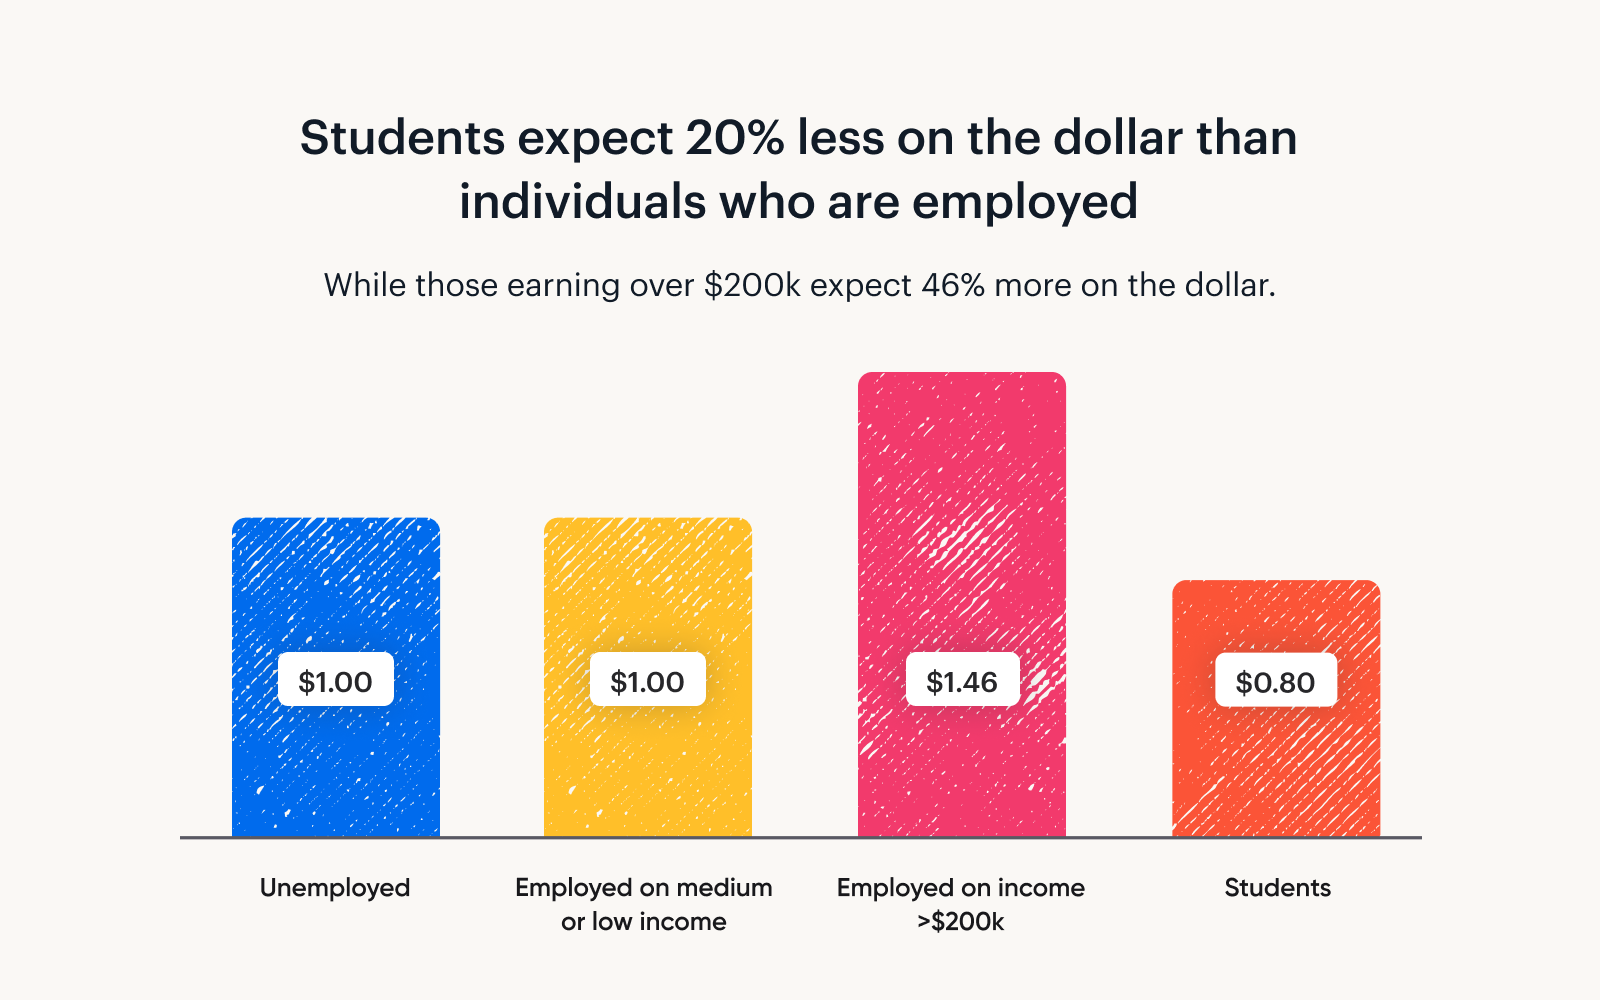 A graph showing that students expect 20% less on the dollar than individuals who are employed.